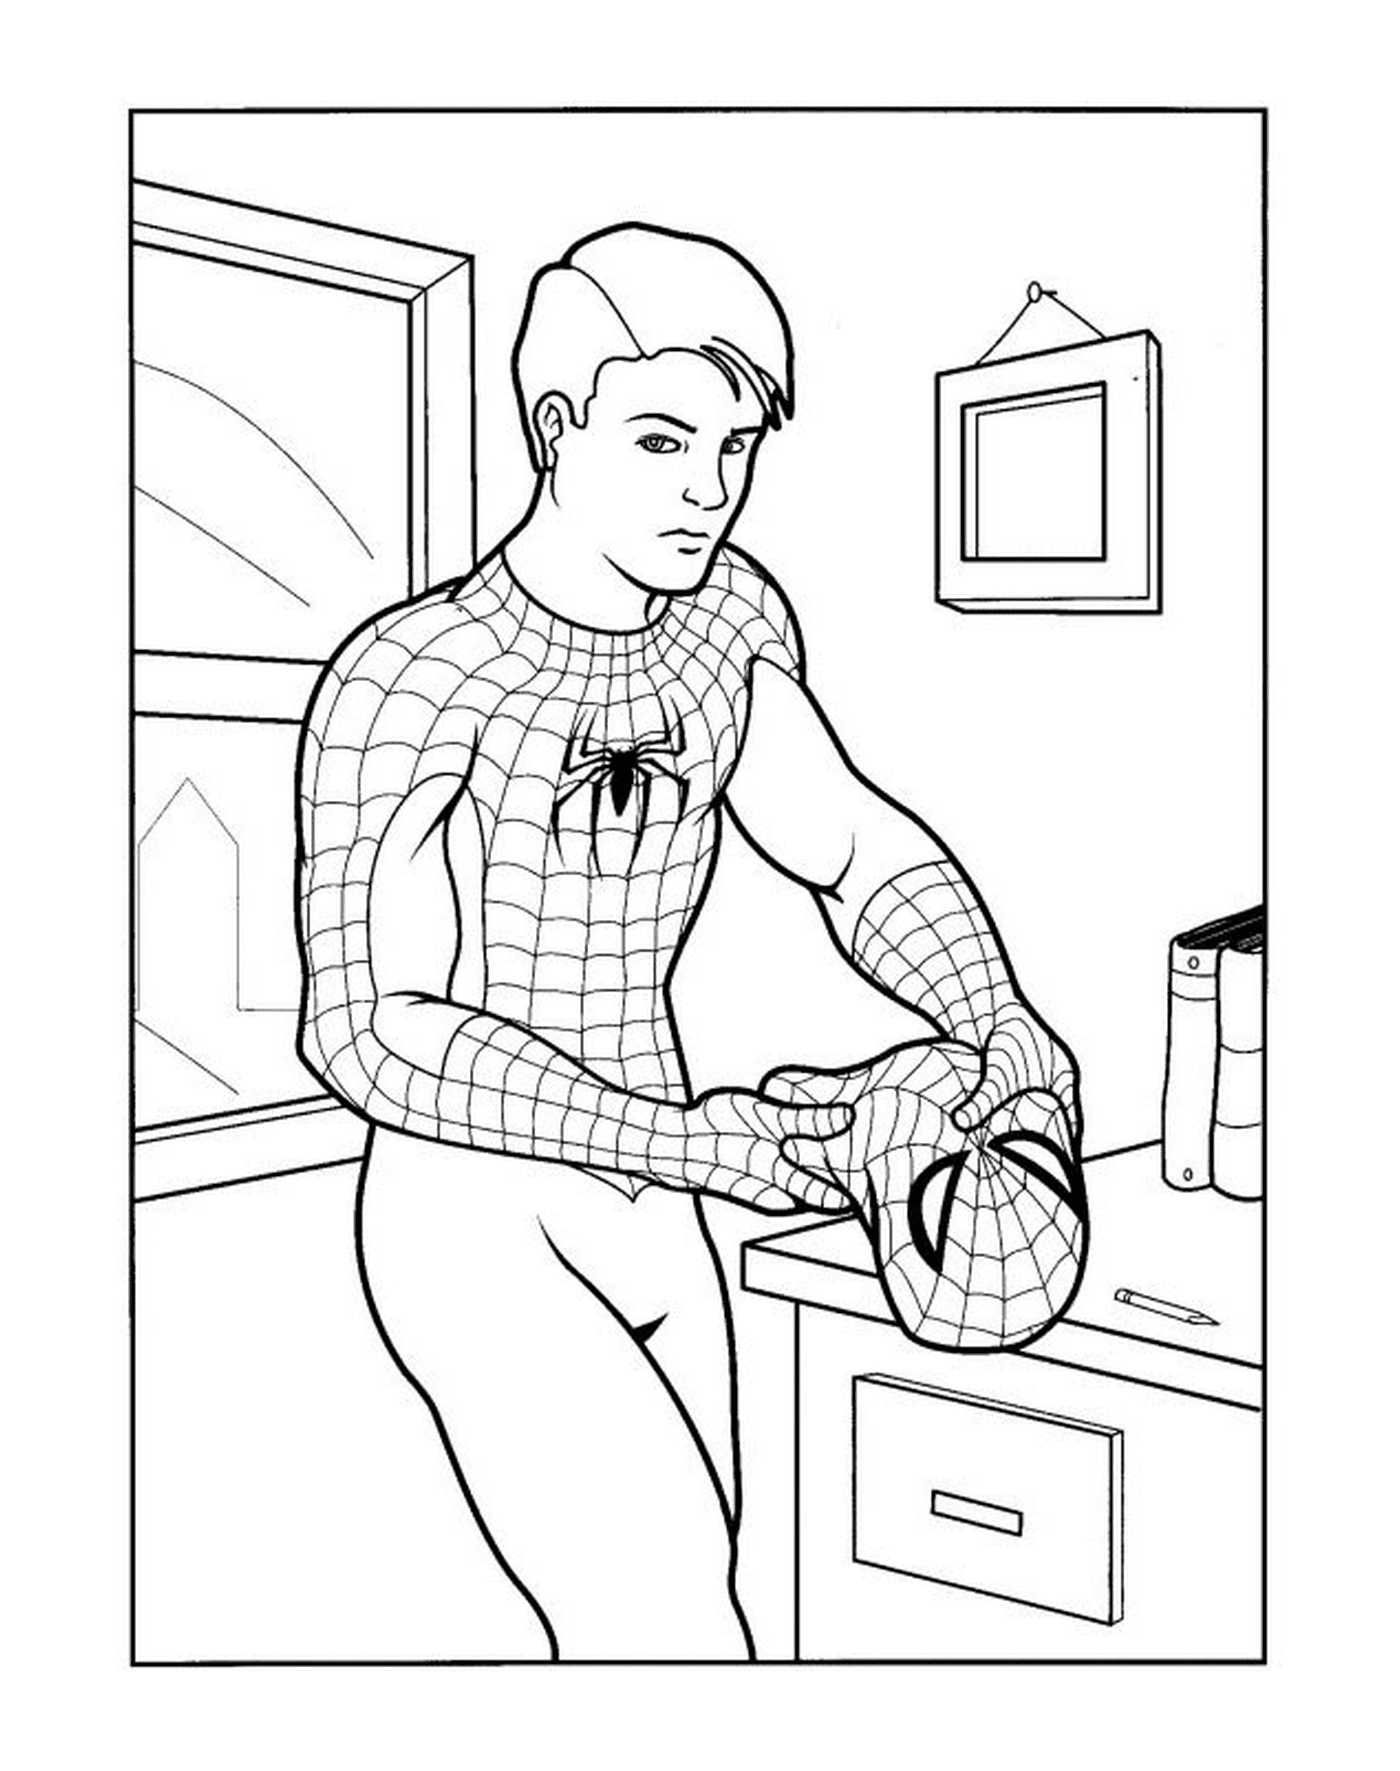  Peter Parker turns into Spiderman 